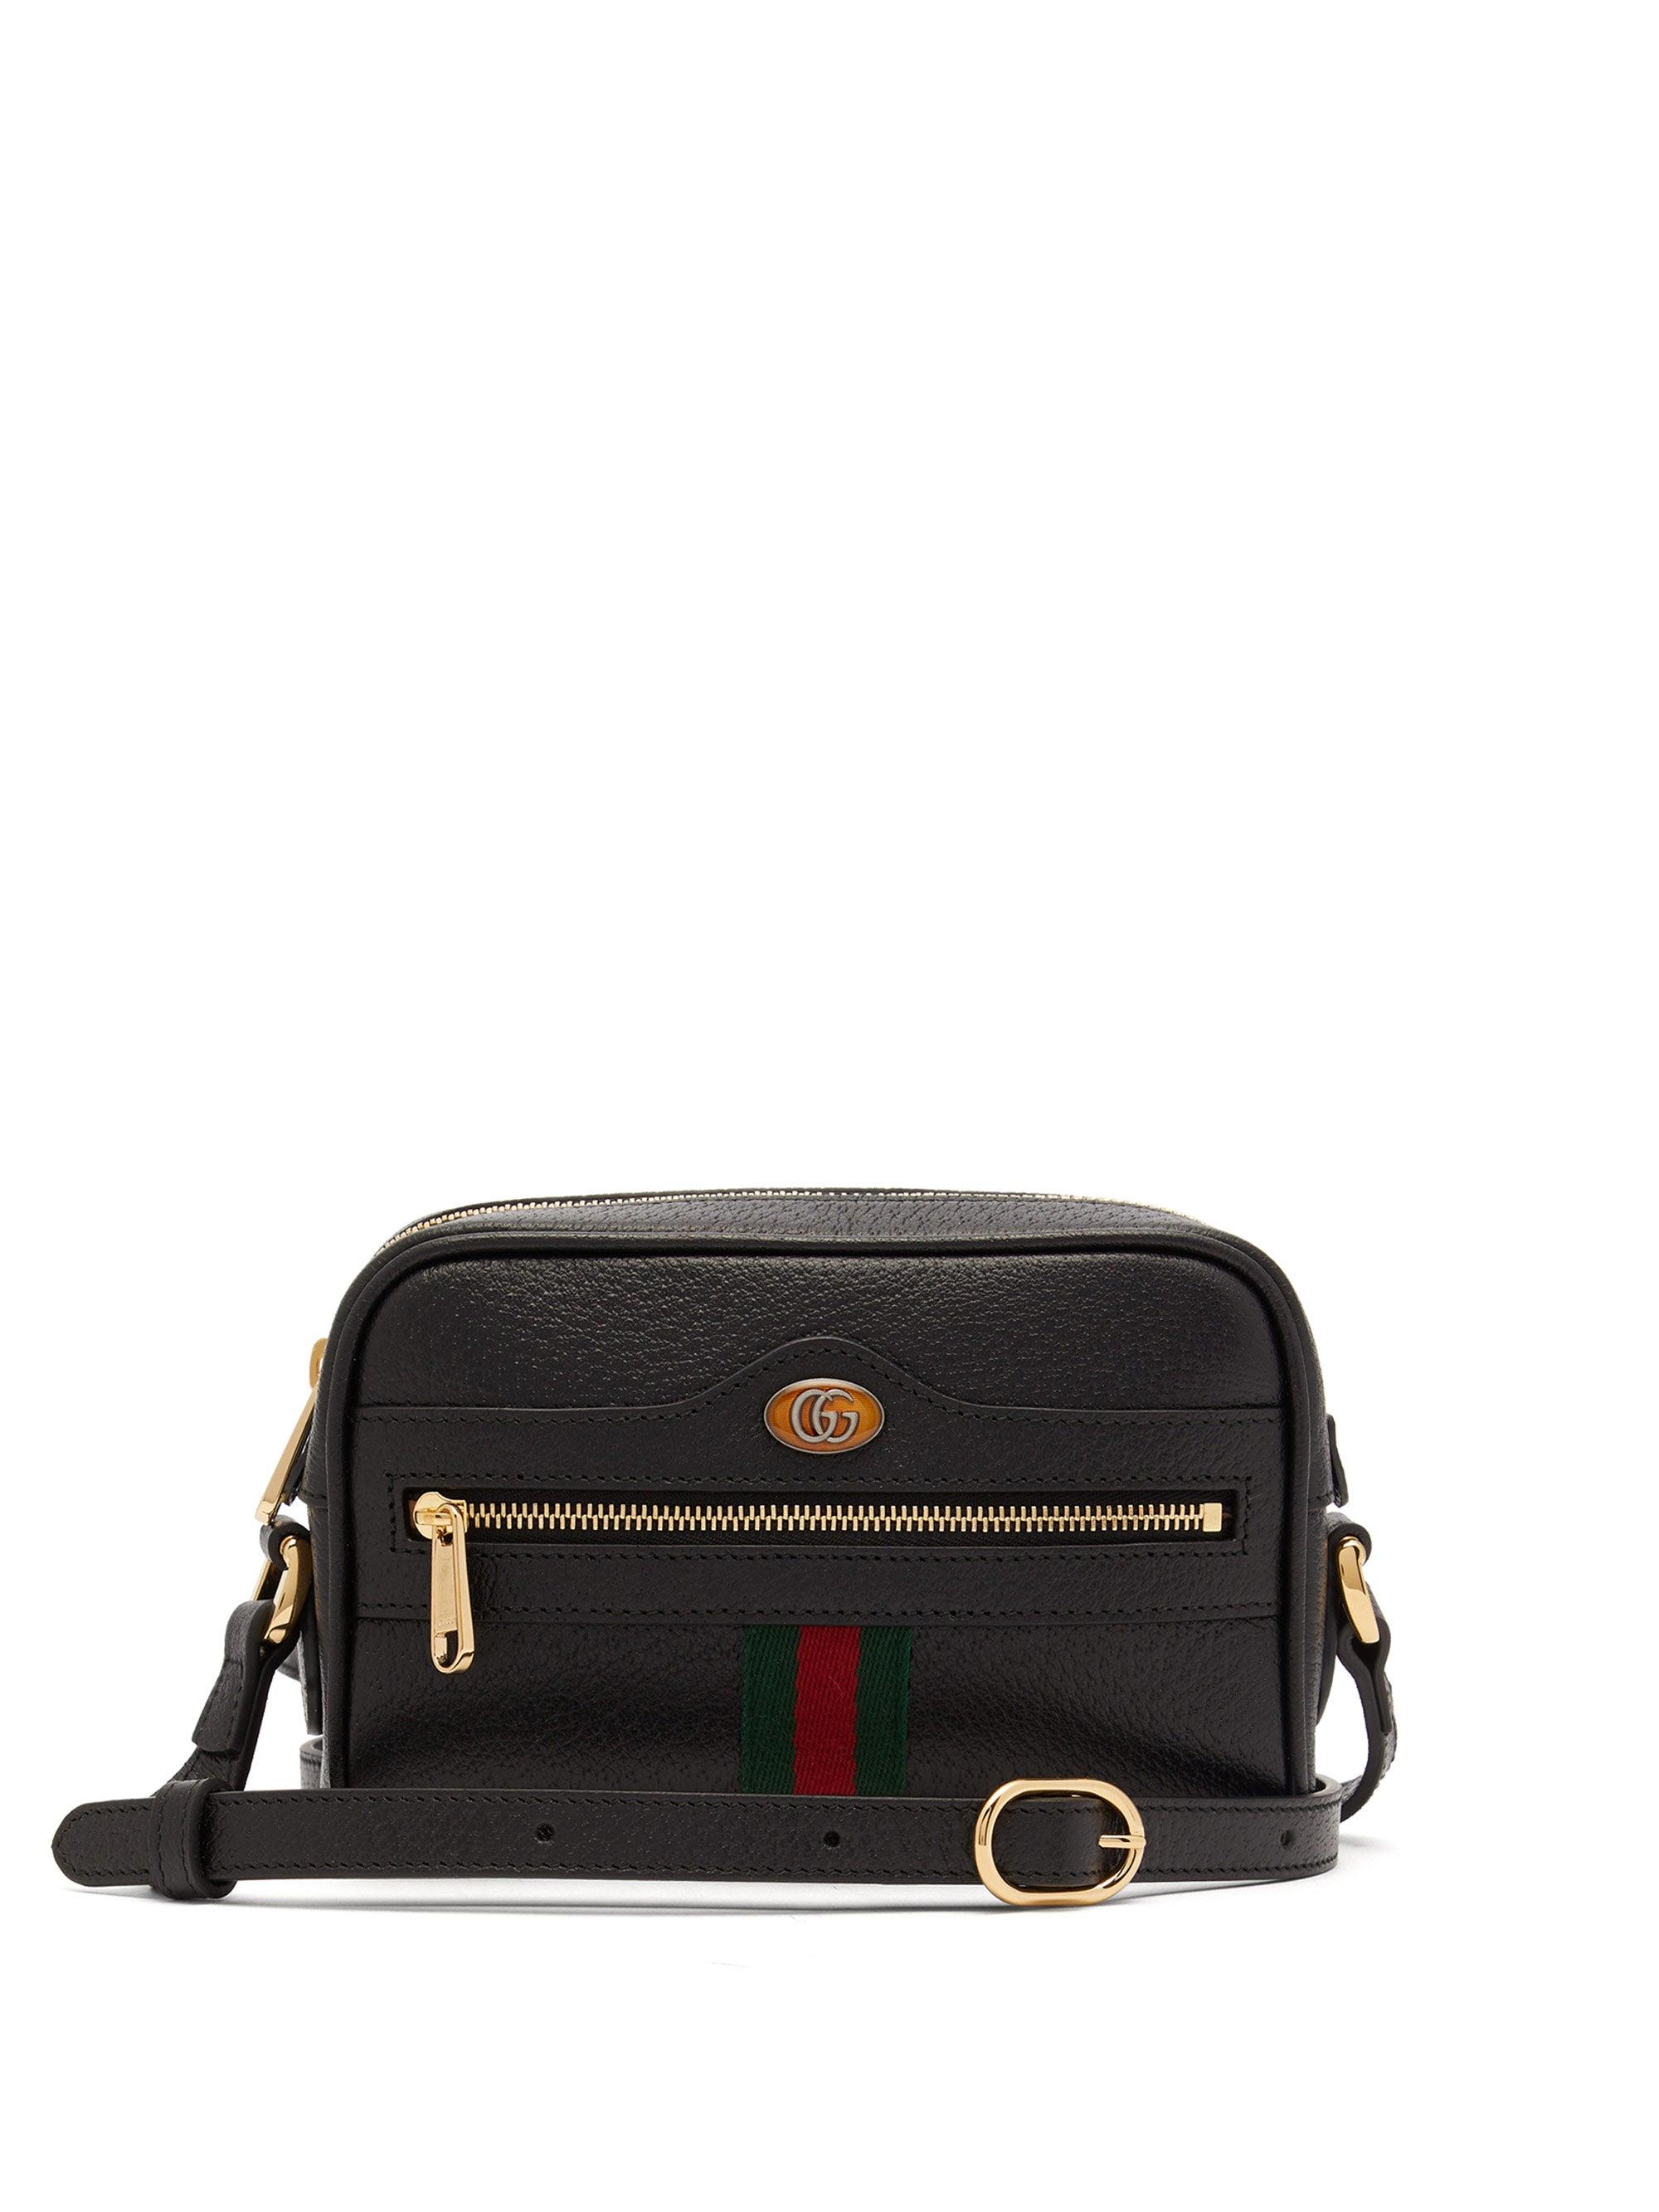 Gucci Ophidia Mini Leather Cross-body Bag in Black | Lyst